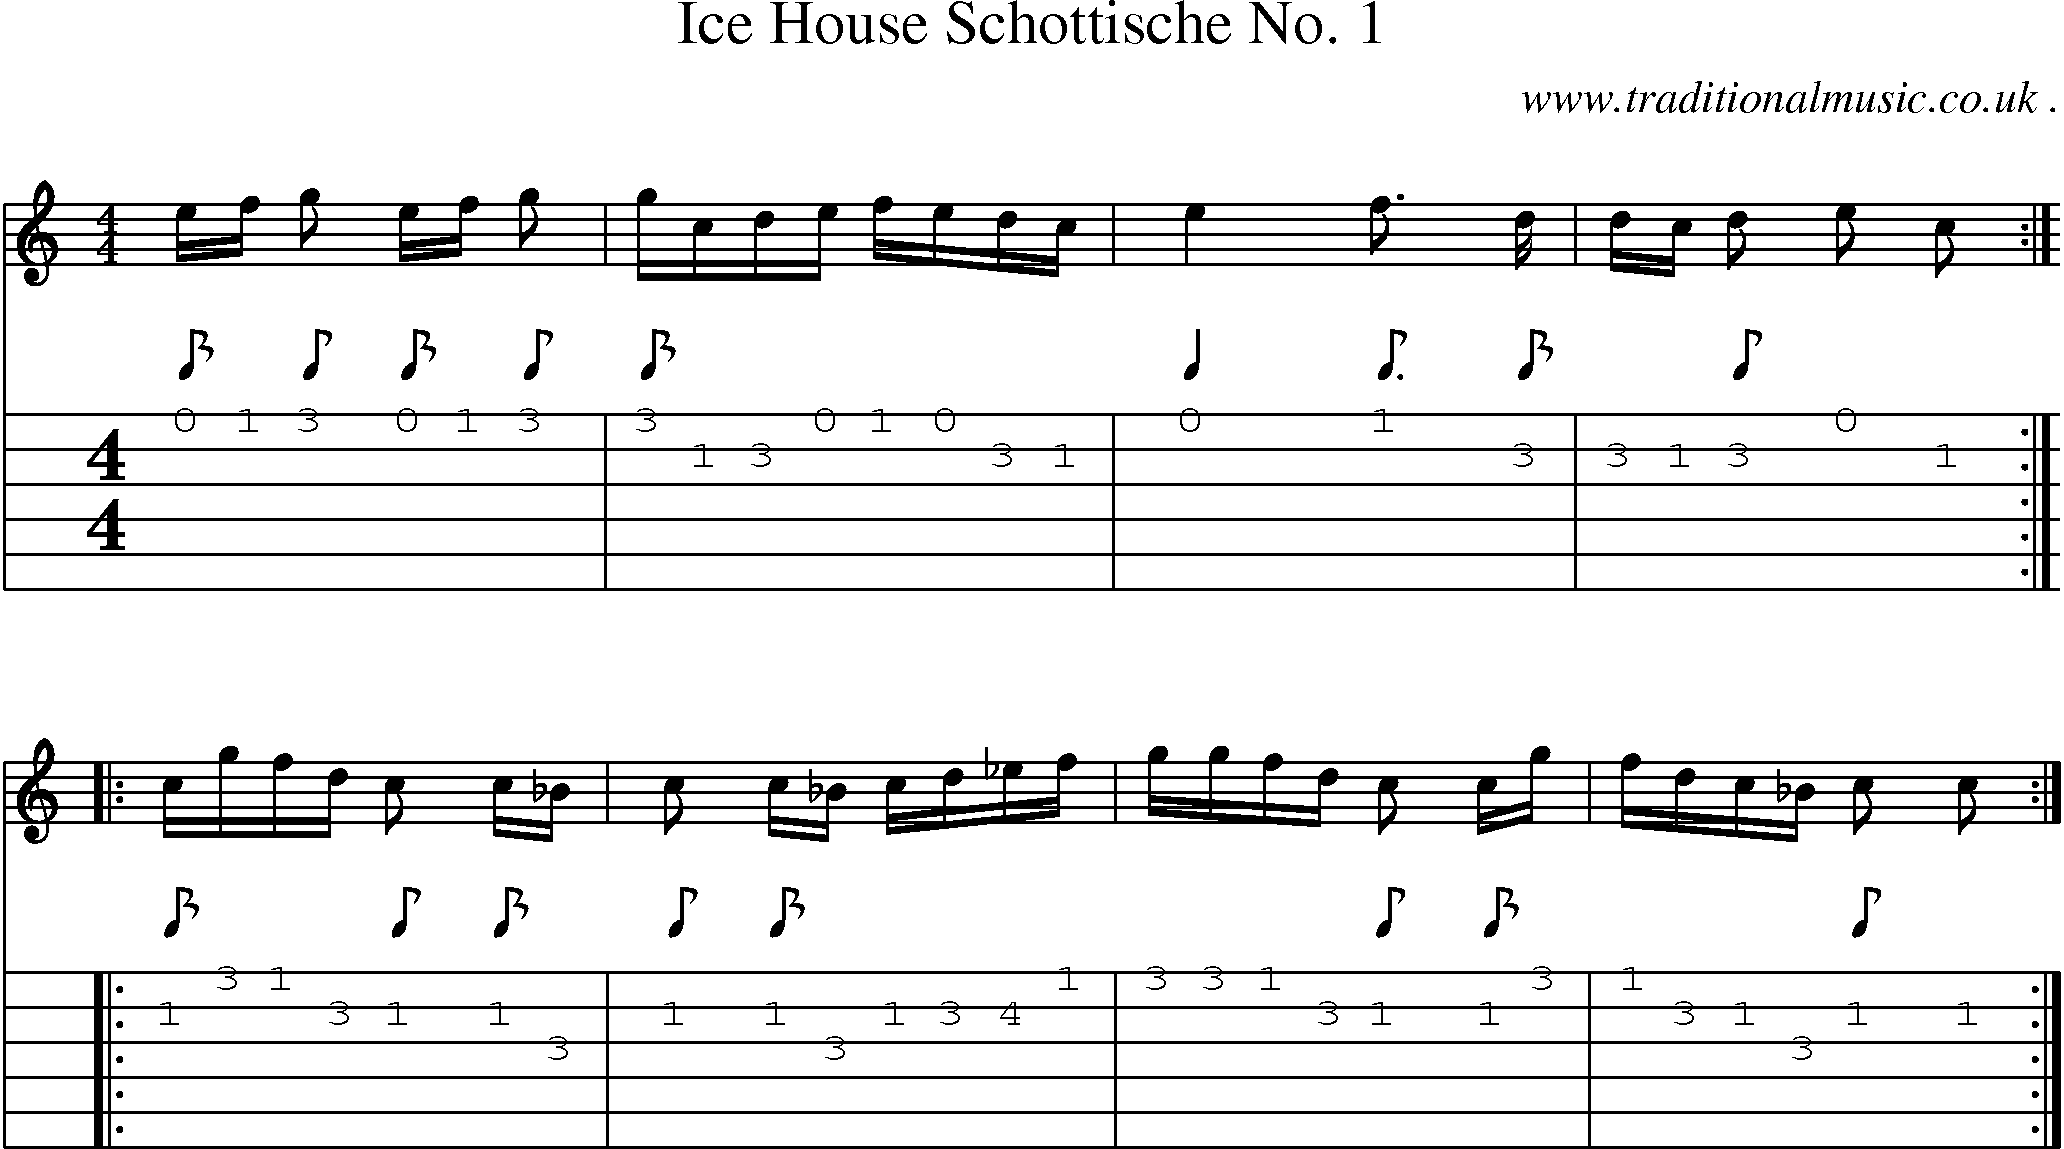 Sheet-Music and Guitar Tabs for Ice House Schottische No 1